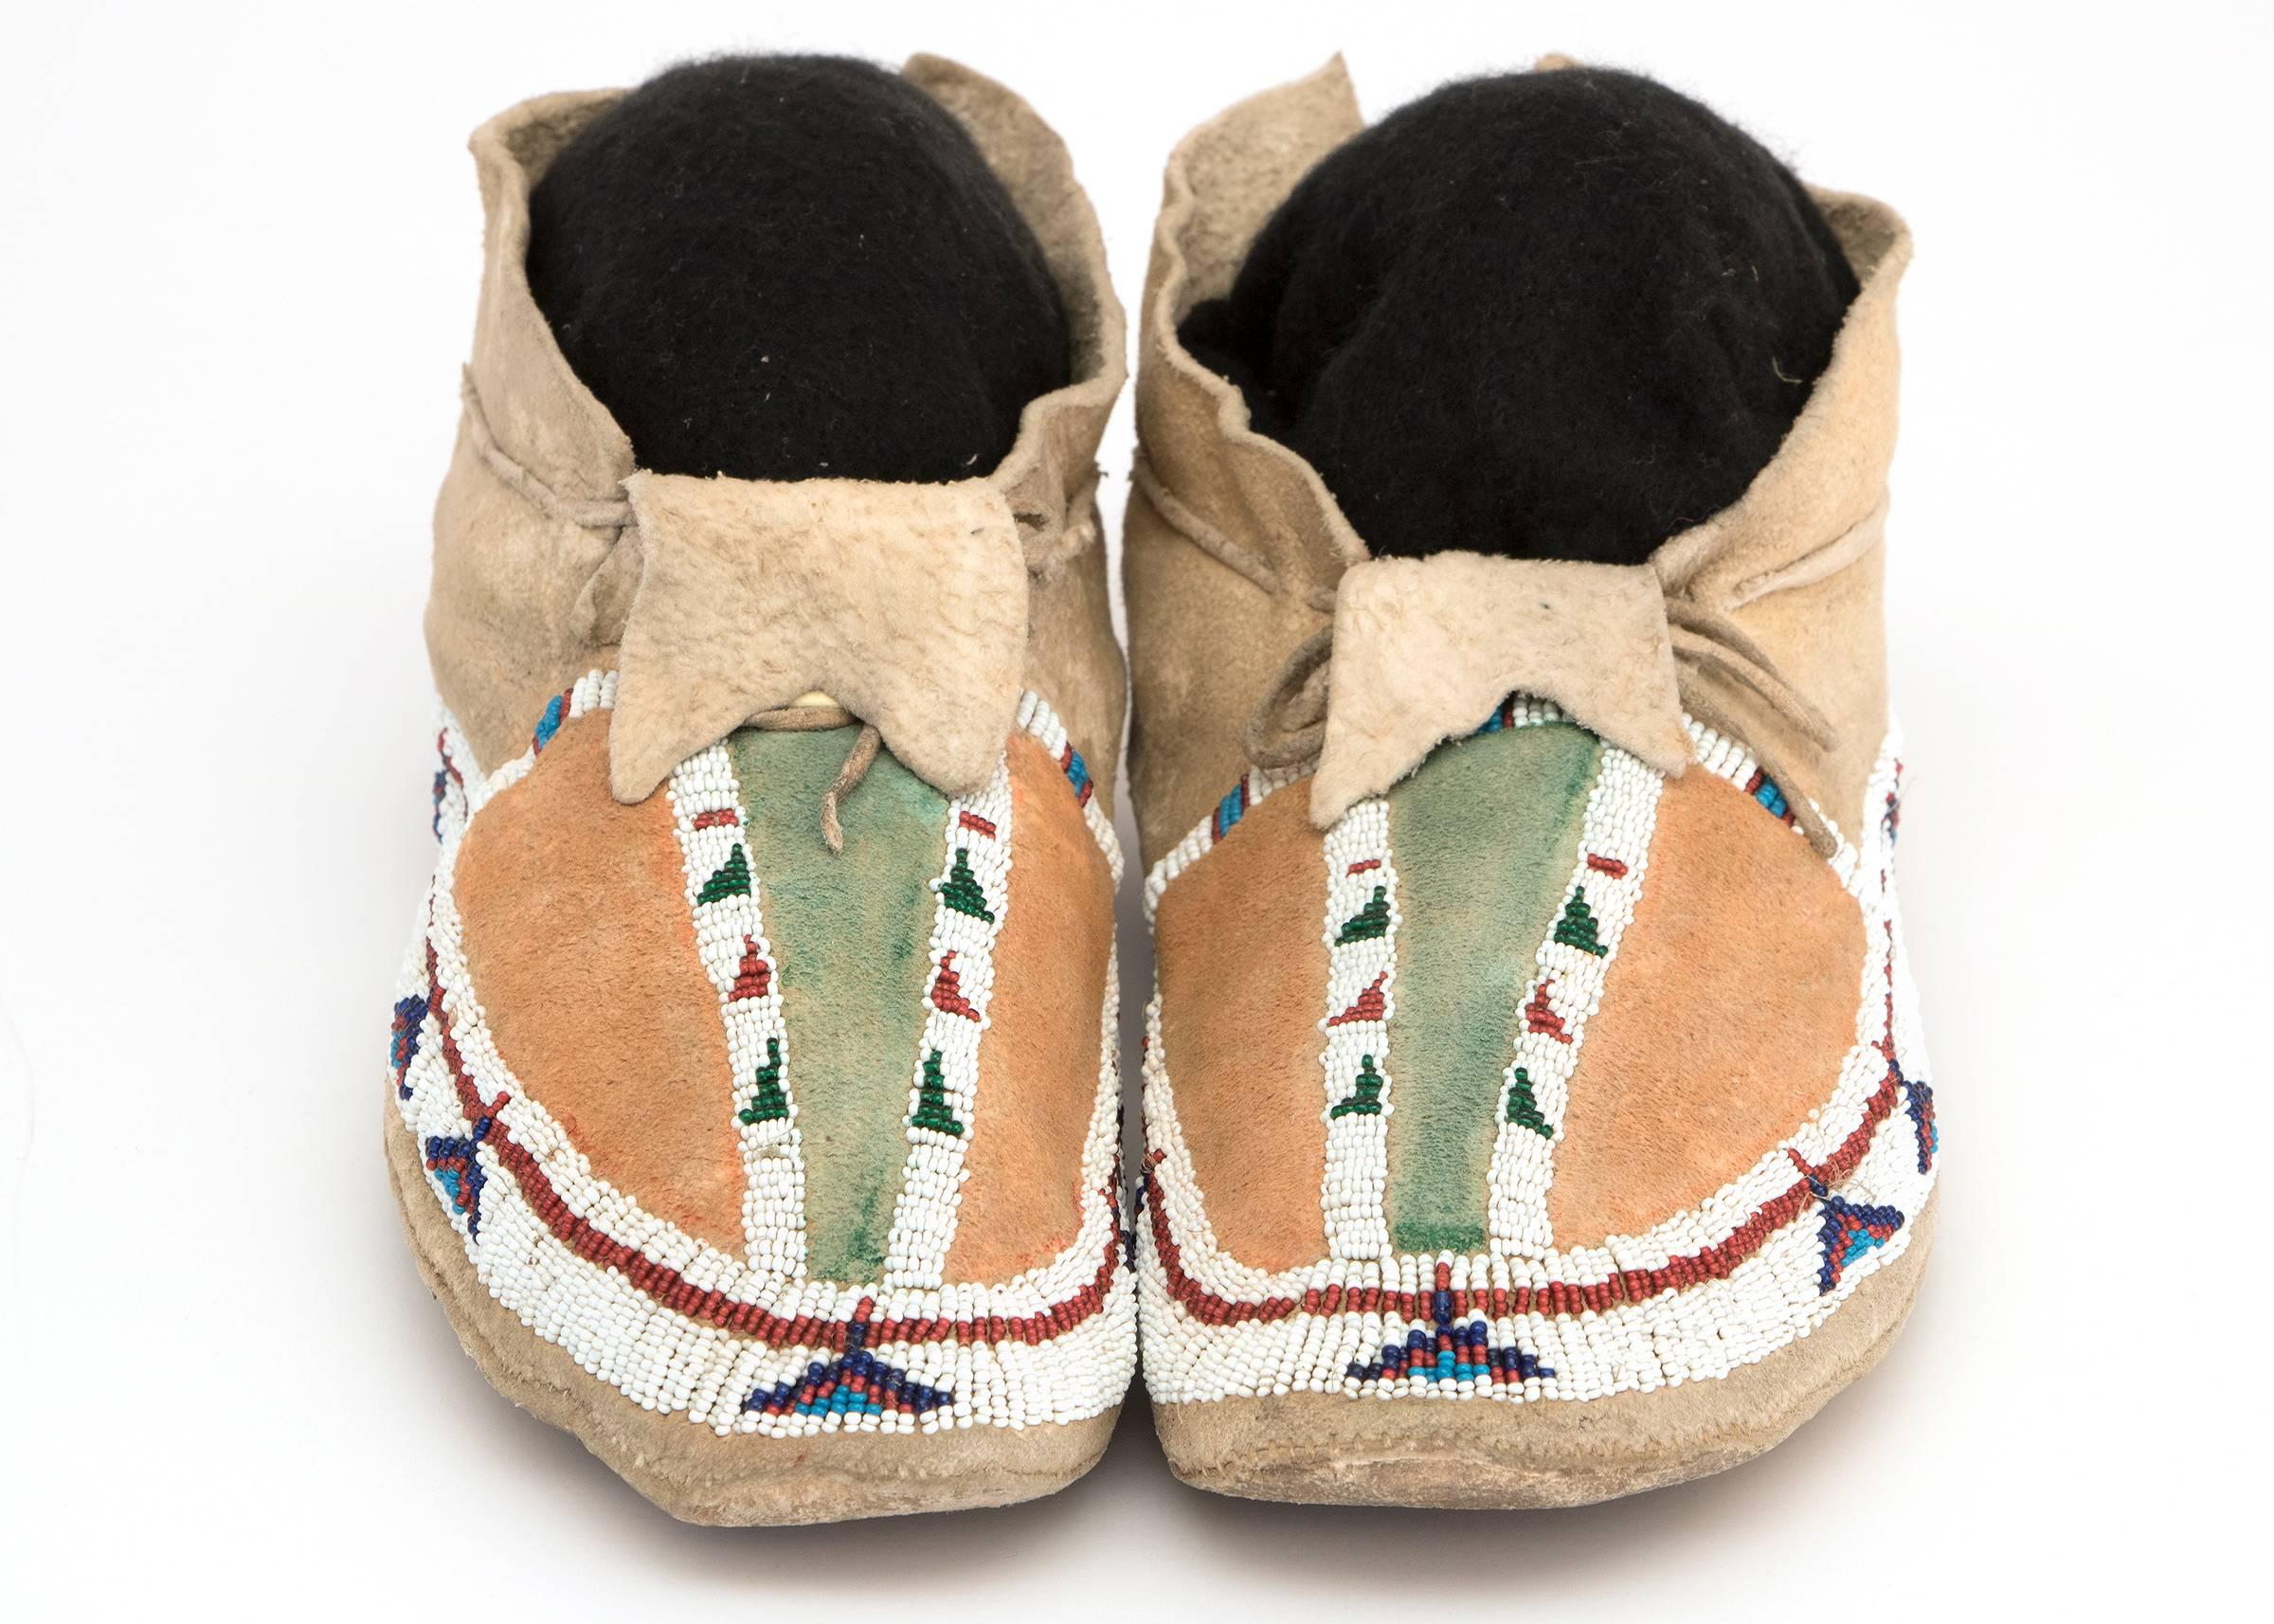 A pair of Southern Cheyenne (Plains Indian) Moccasins created circa 1890. Constructed of Native-Tanned hide and partially beaded with glass trade beads with stylized Tepee motifs. The beadwork surrounds two Buffalo Tracks along the vamps and the